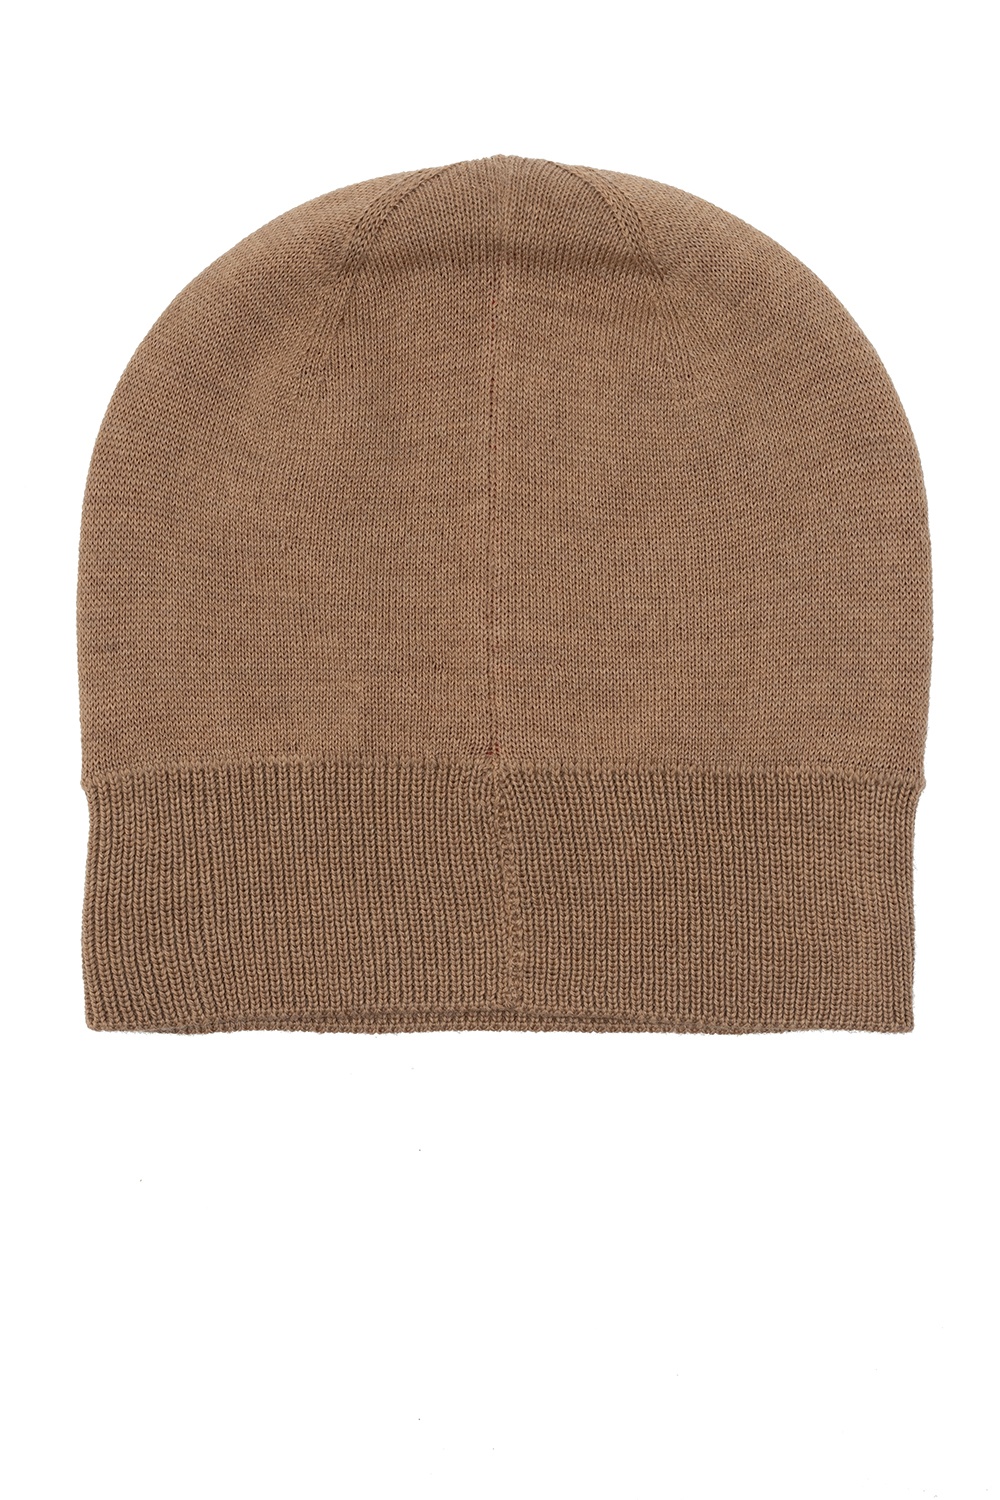 Chloé hat Branded with logo